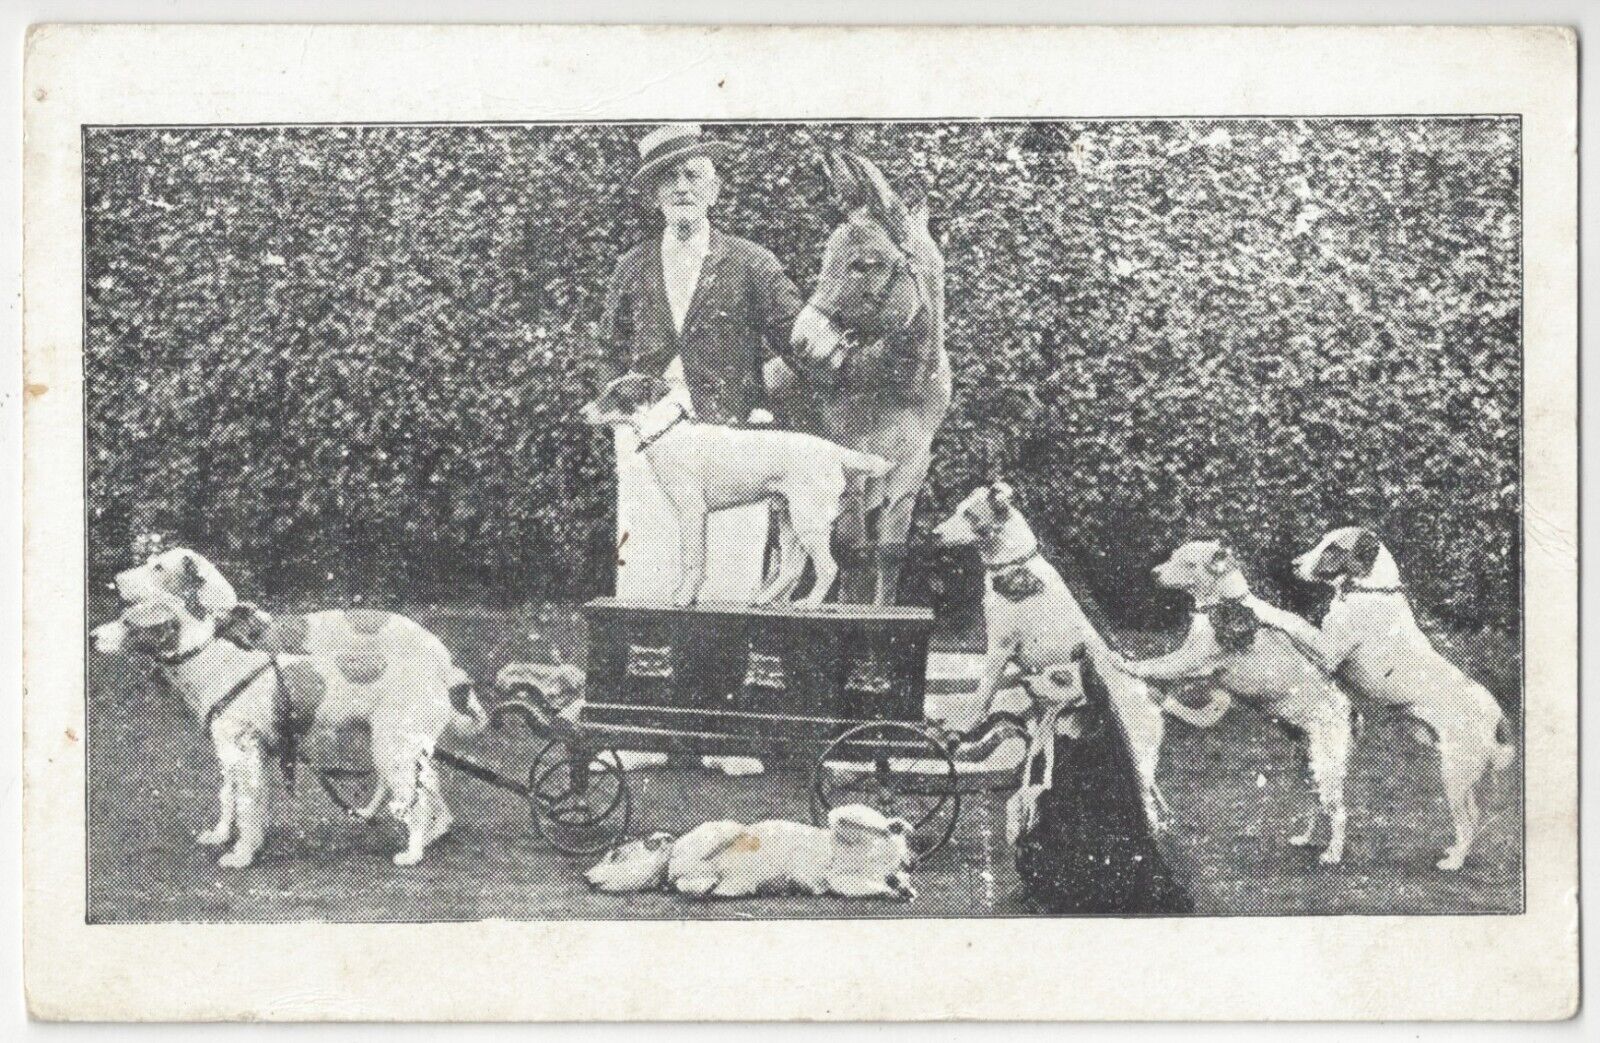 1910 Performing Fox Terrier Dogs, Donkey & Trainer - Vintage Postcard